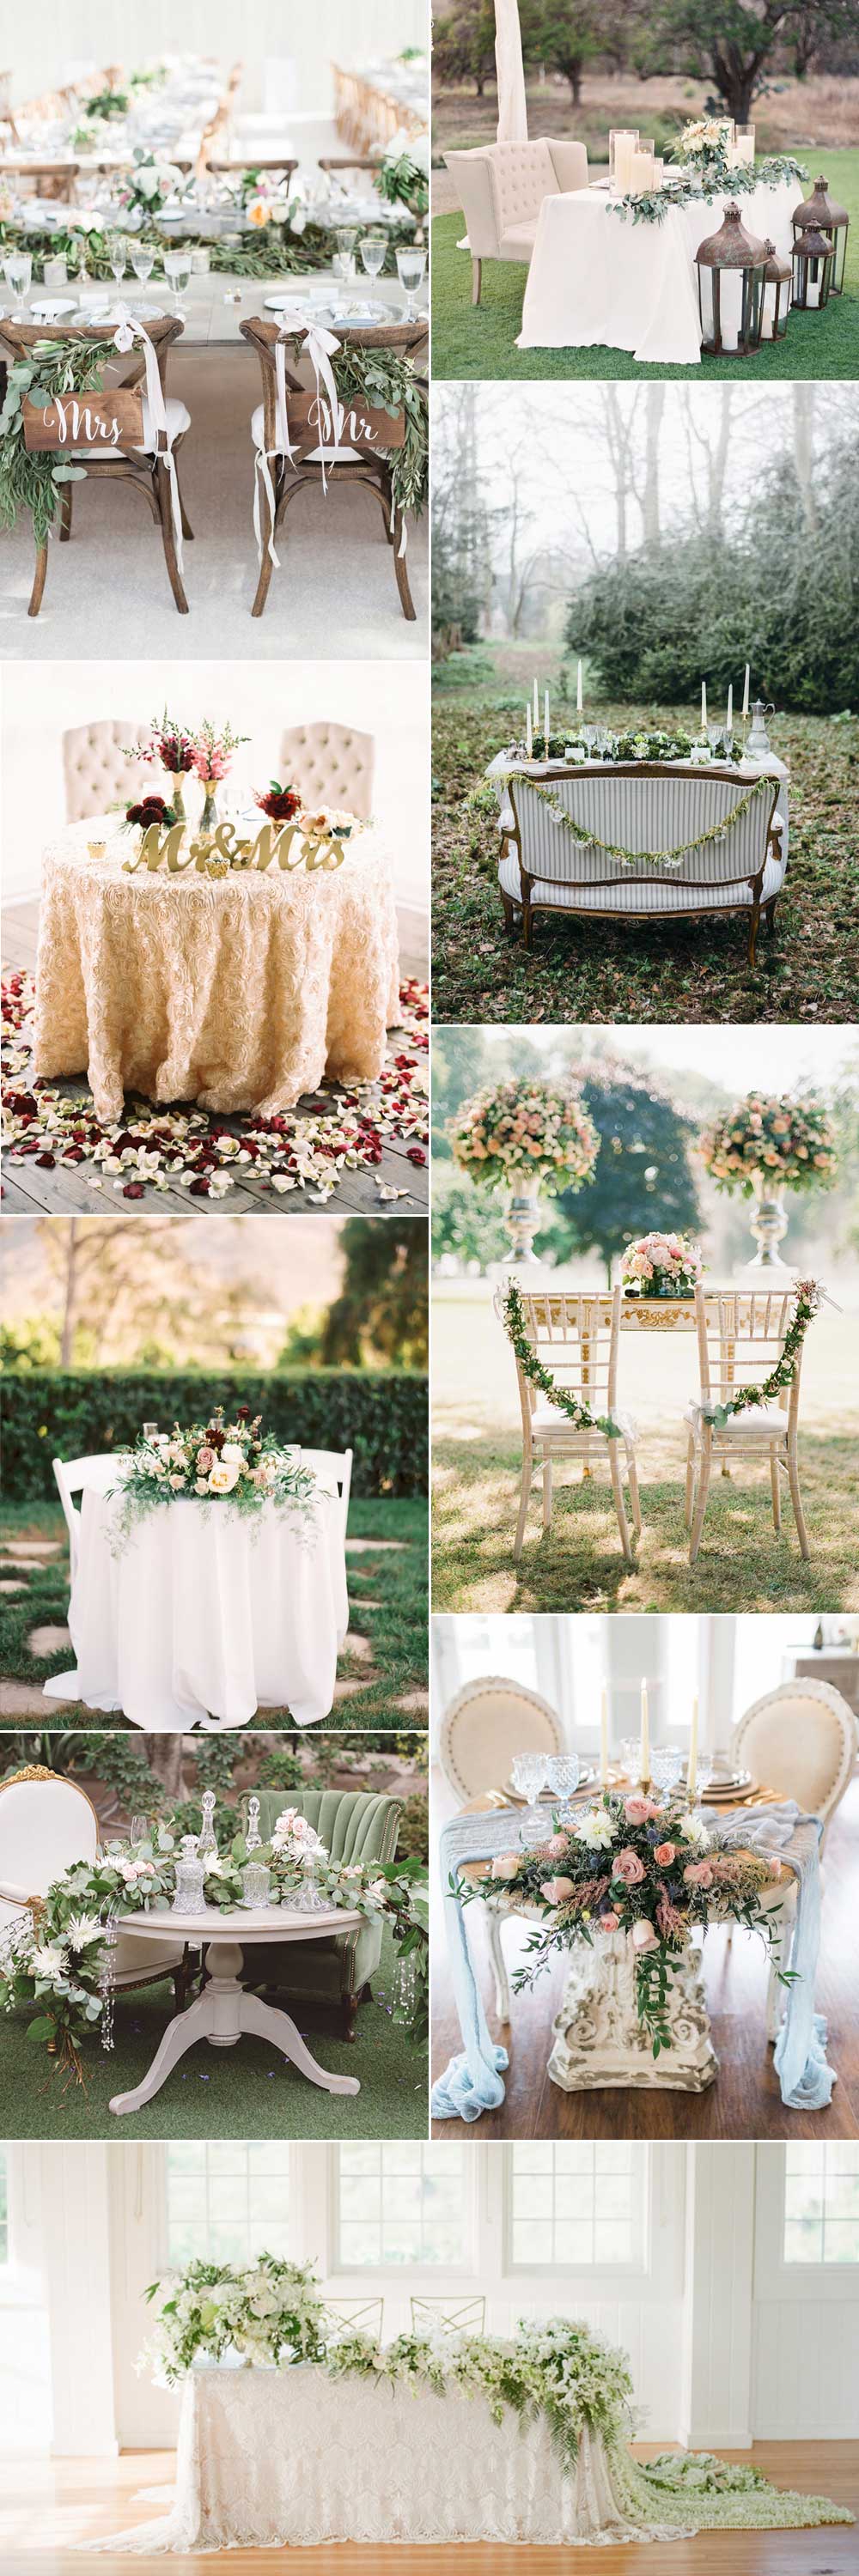 Sweetheart wedding tables for two